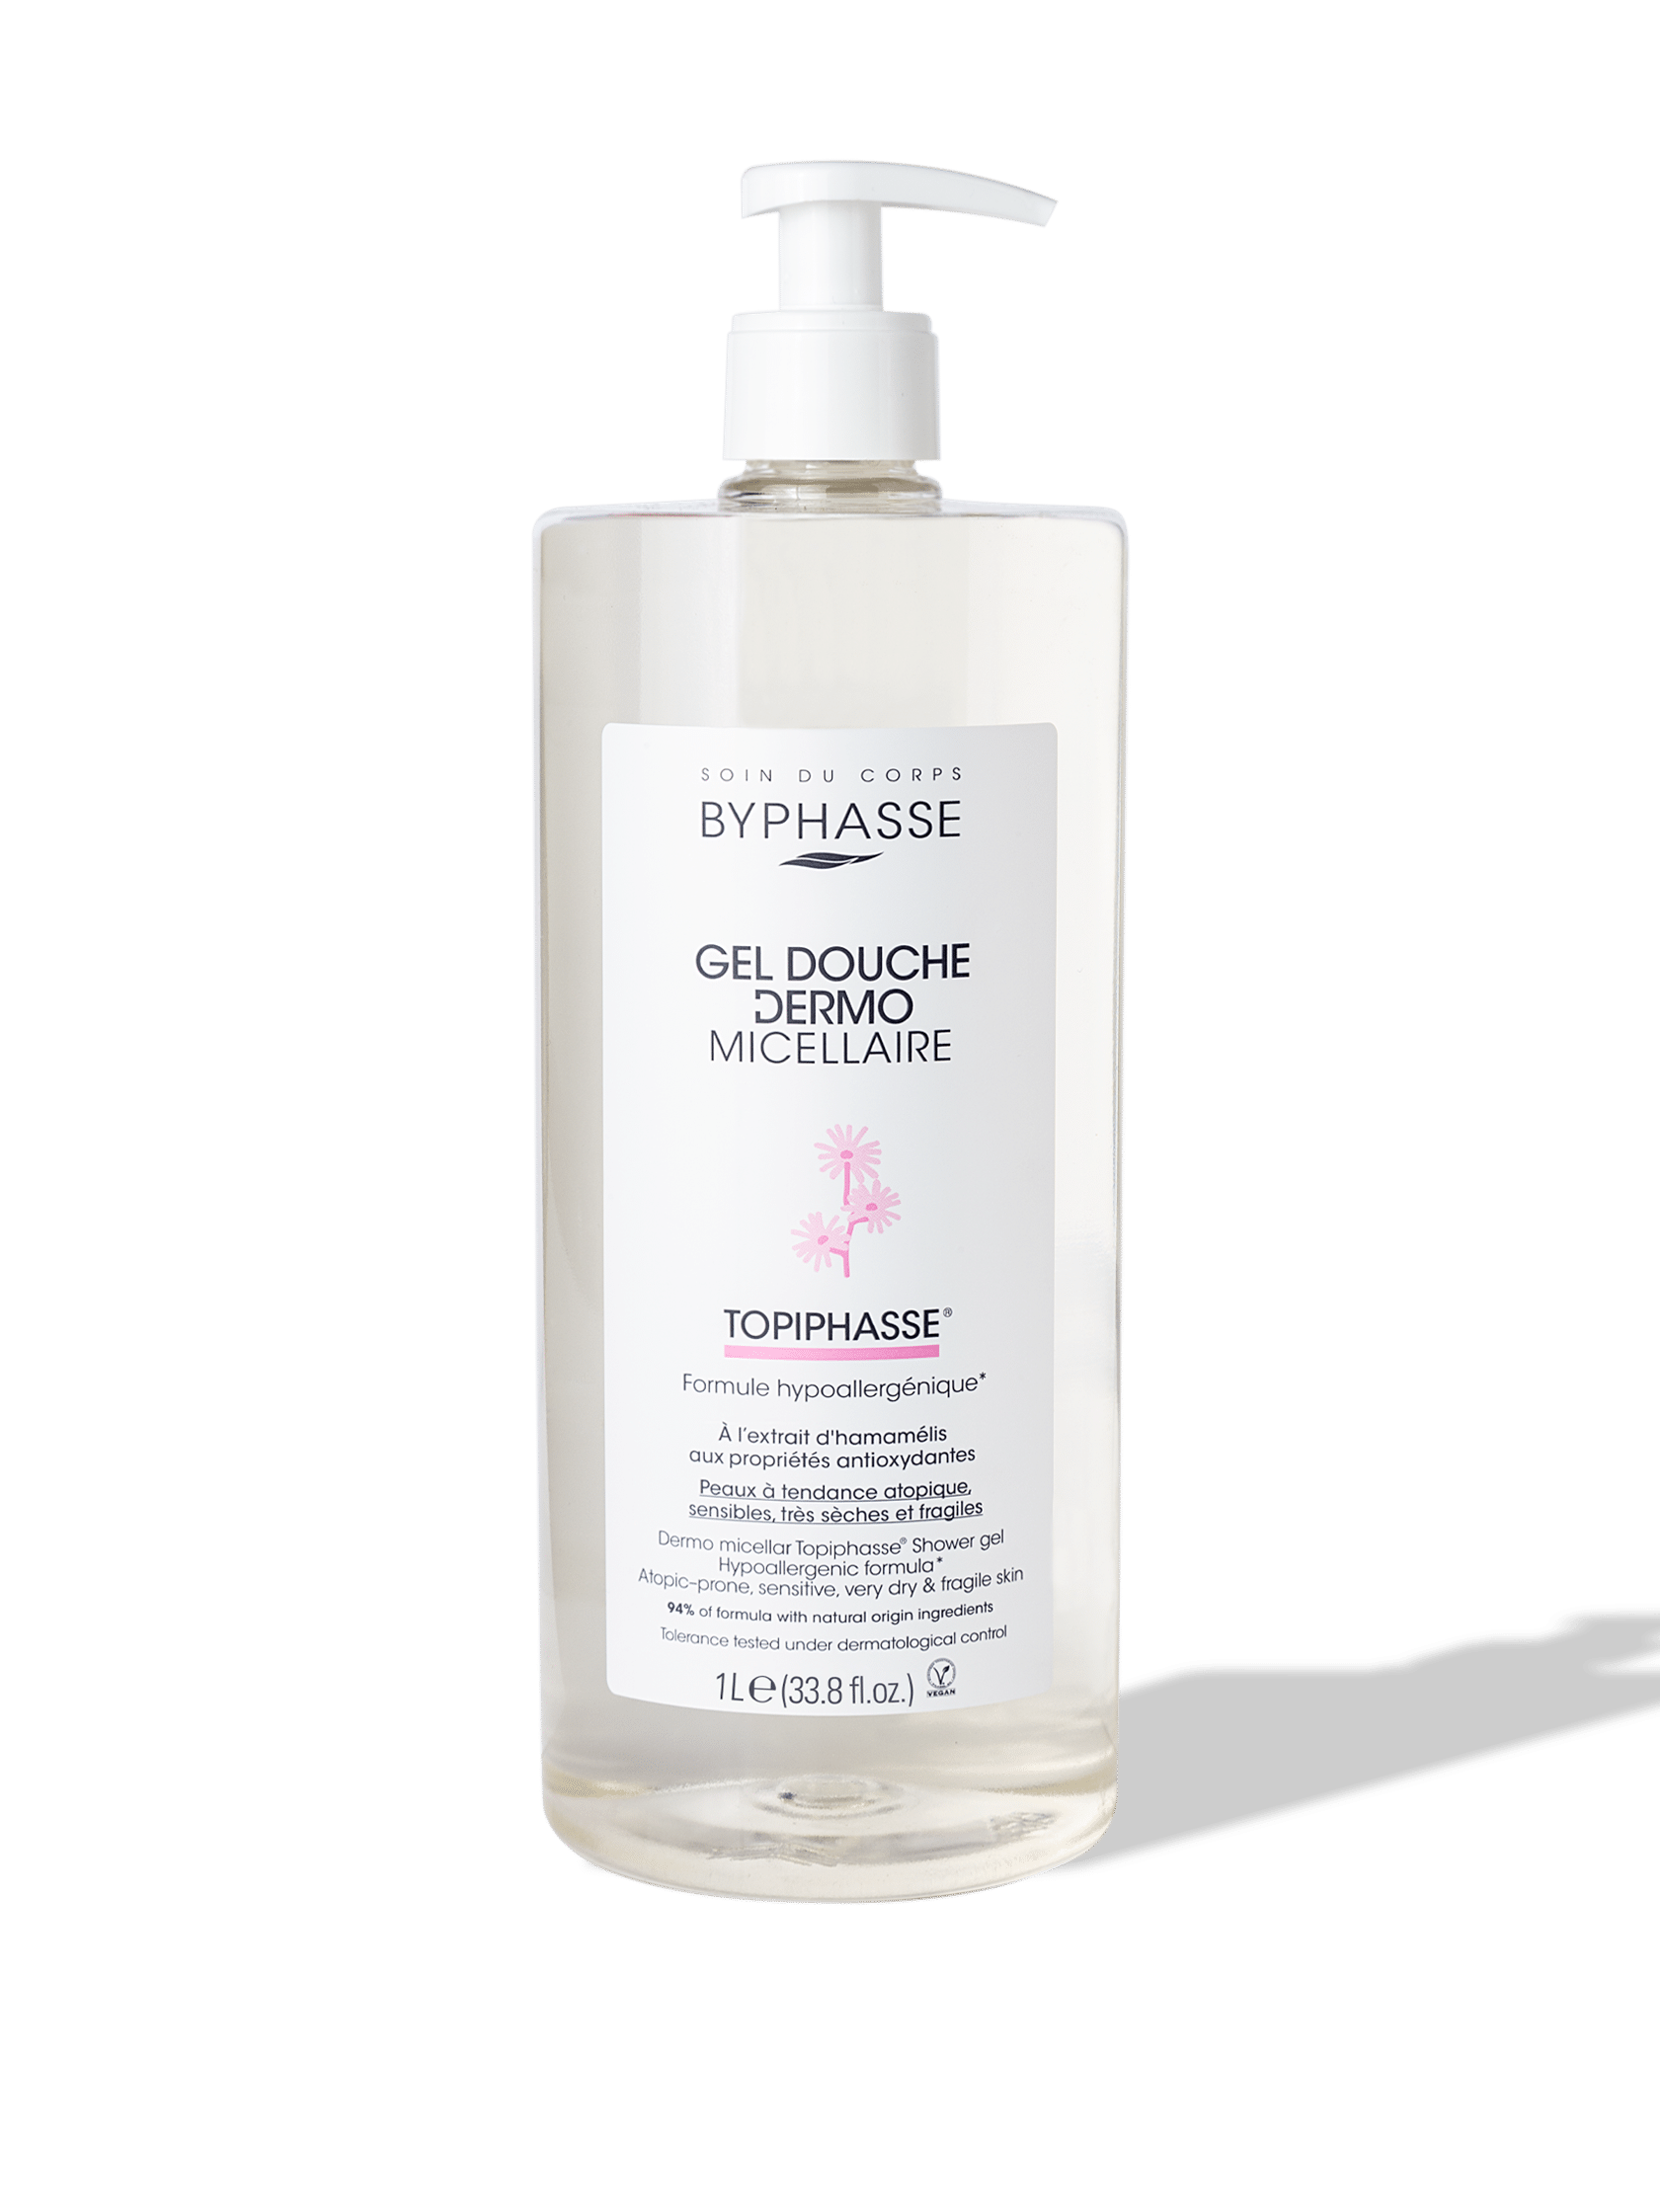 GEL DOUCHE DERMO MICELLARE TOPIPHASSE 1L product_image